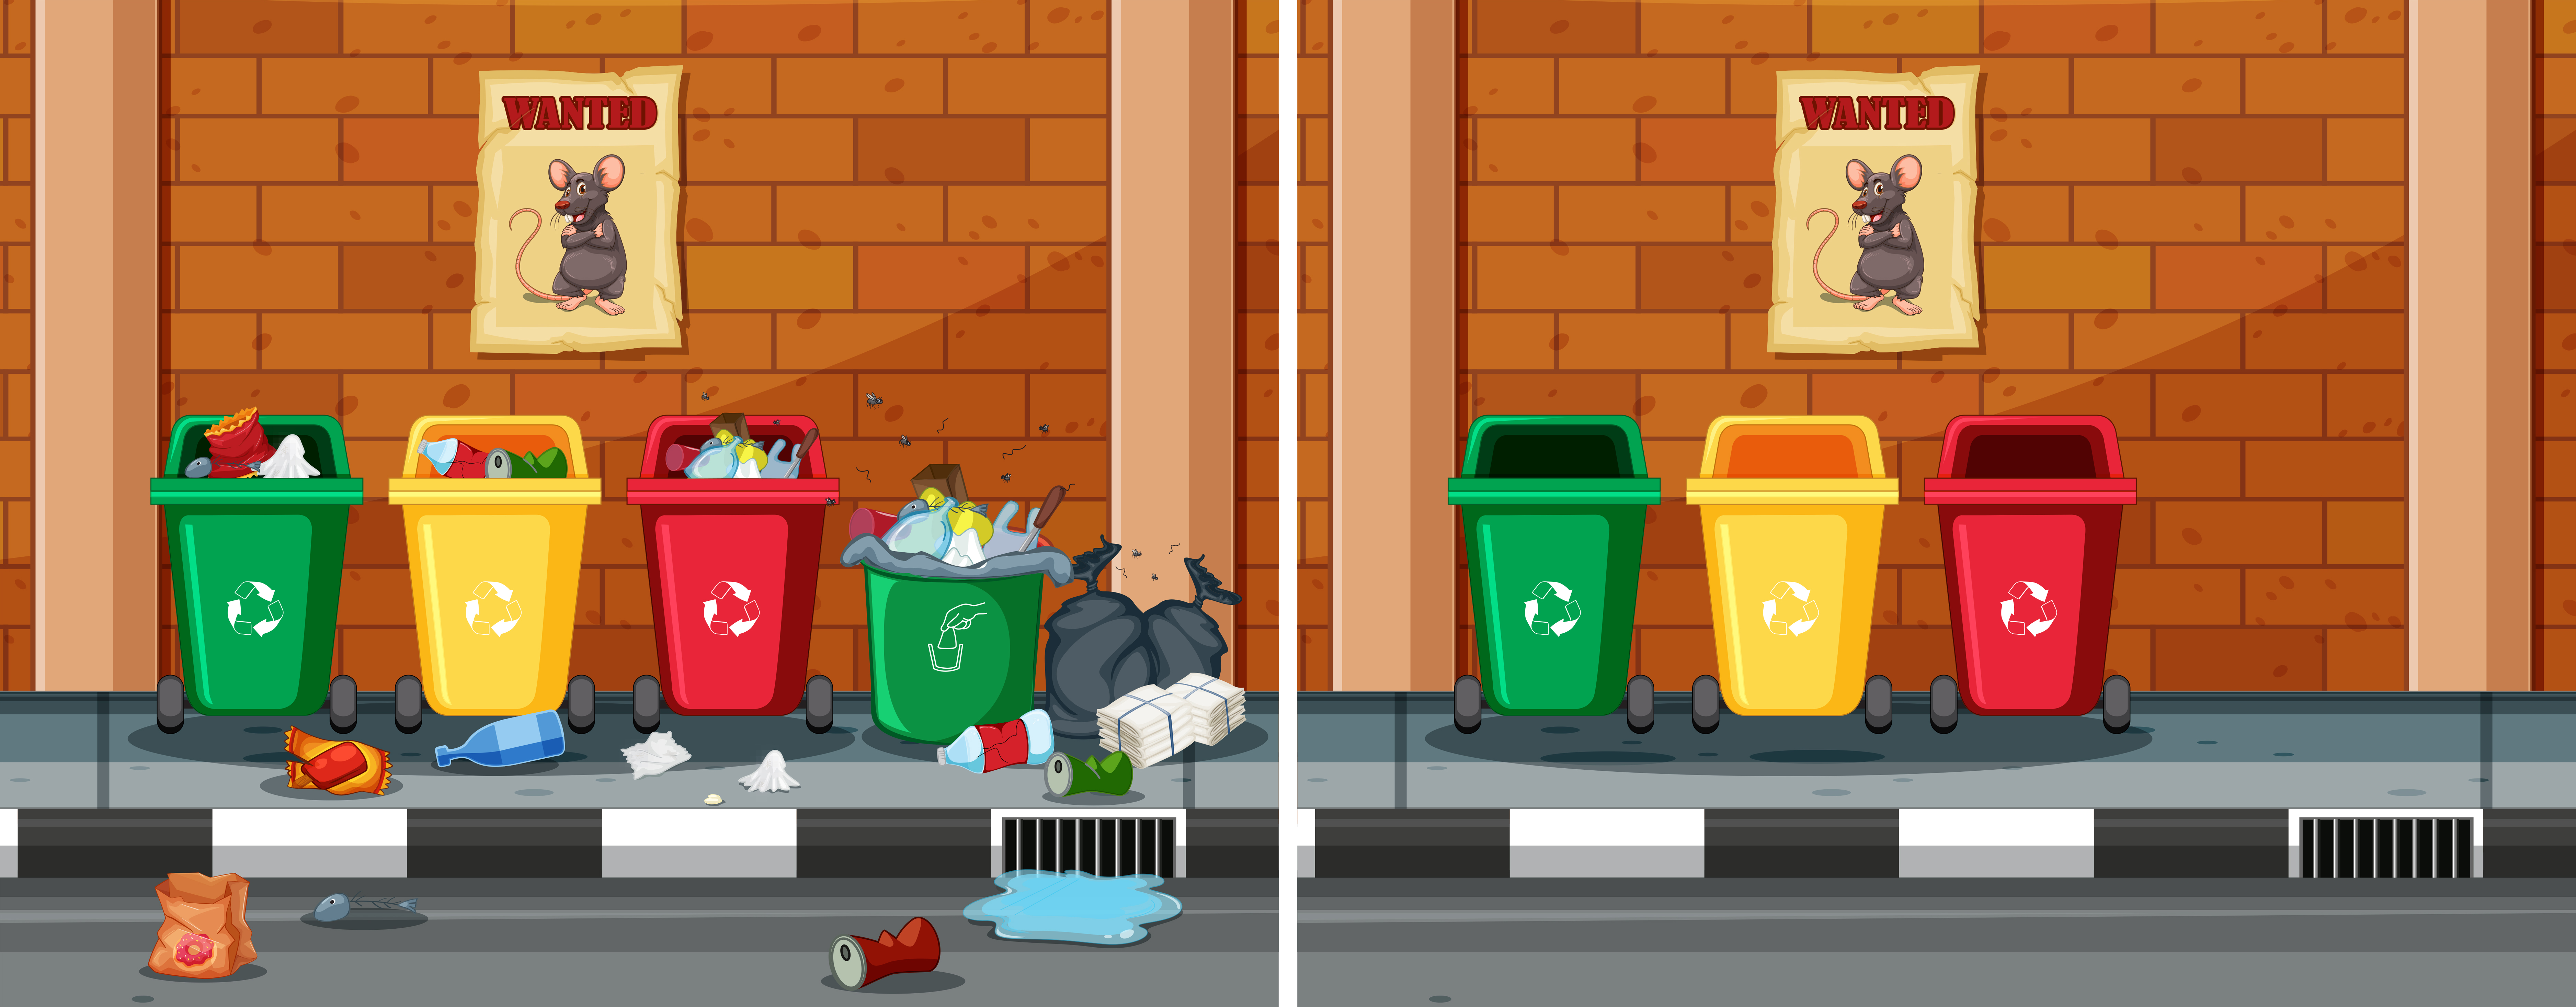 Before And After Cleaning Dirty Street 432397 Download Free Vectors